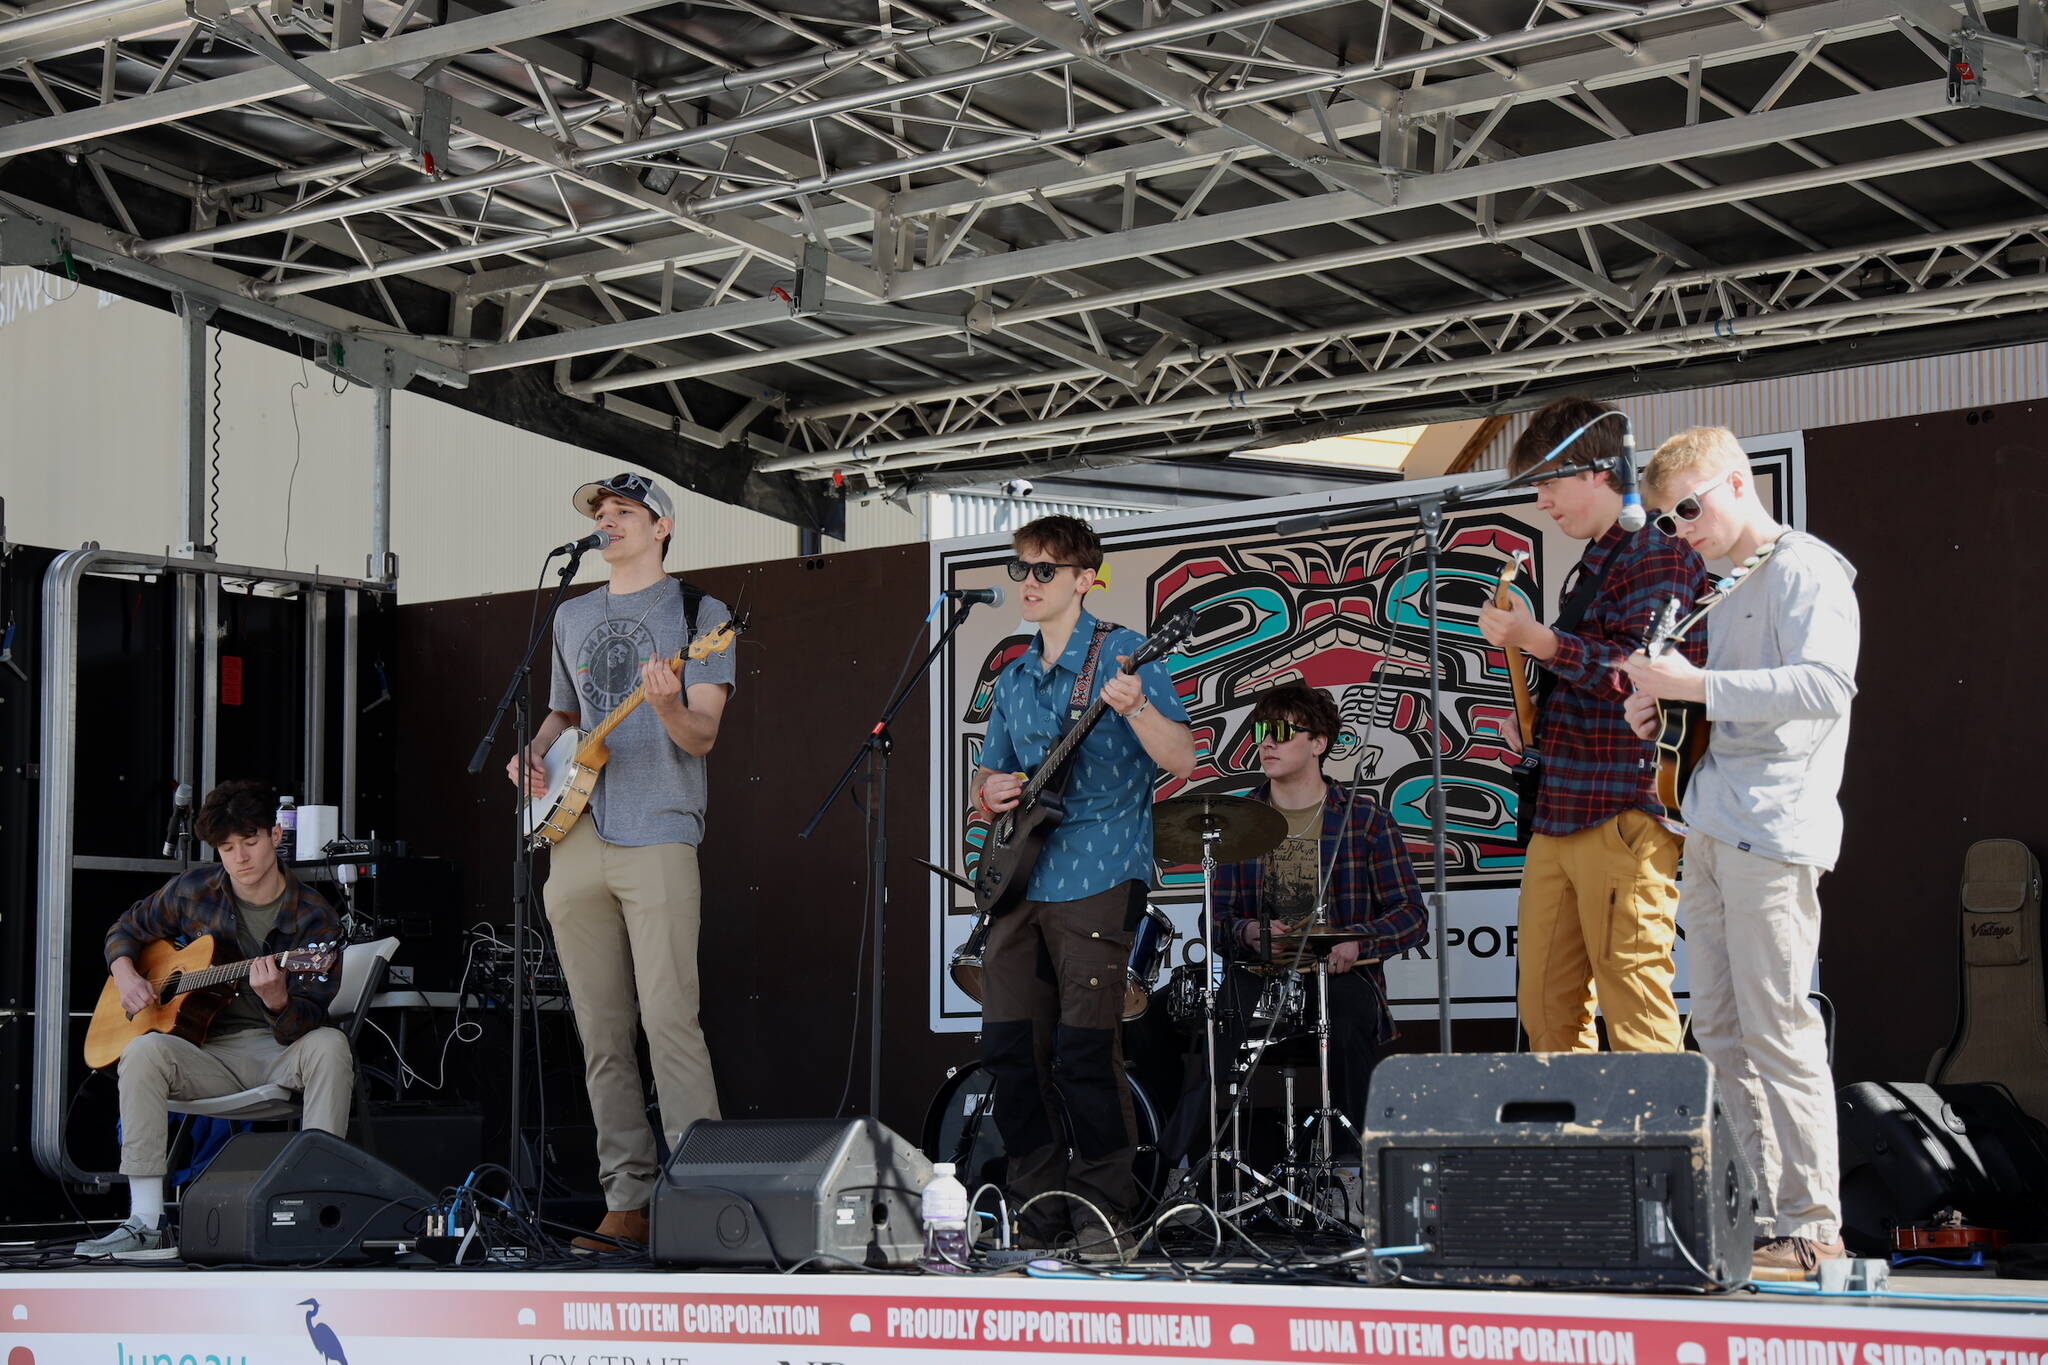 From left to right, seniors Eli Crupi, Lake Bartlett, Aidan Kovach, Brandon Campbell, Jack Schwarting and Finn Kesey perform on stage during the 2023 Juneau Maritime Festival Saturday afternoon at the Elizabeth Peratrovich Plaza. The band, known as the Radio Flyers, have been playing together since they were in the 5th grade. The performance Saturday was one of the band’s last together before the members leave for college. (Clarise Larson / Juneau Empire)